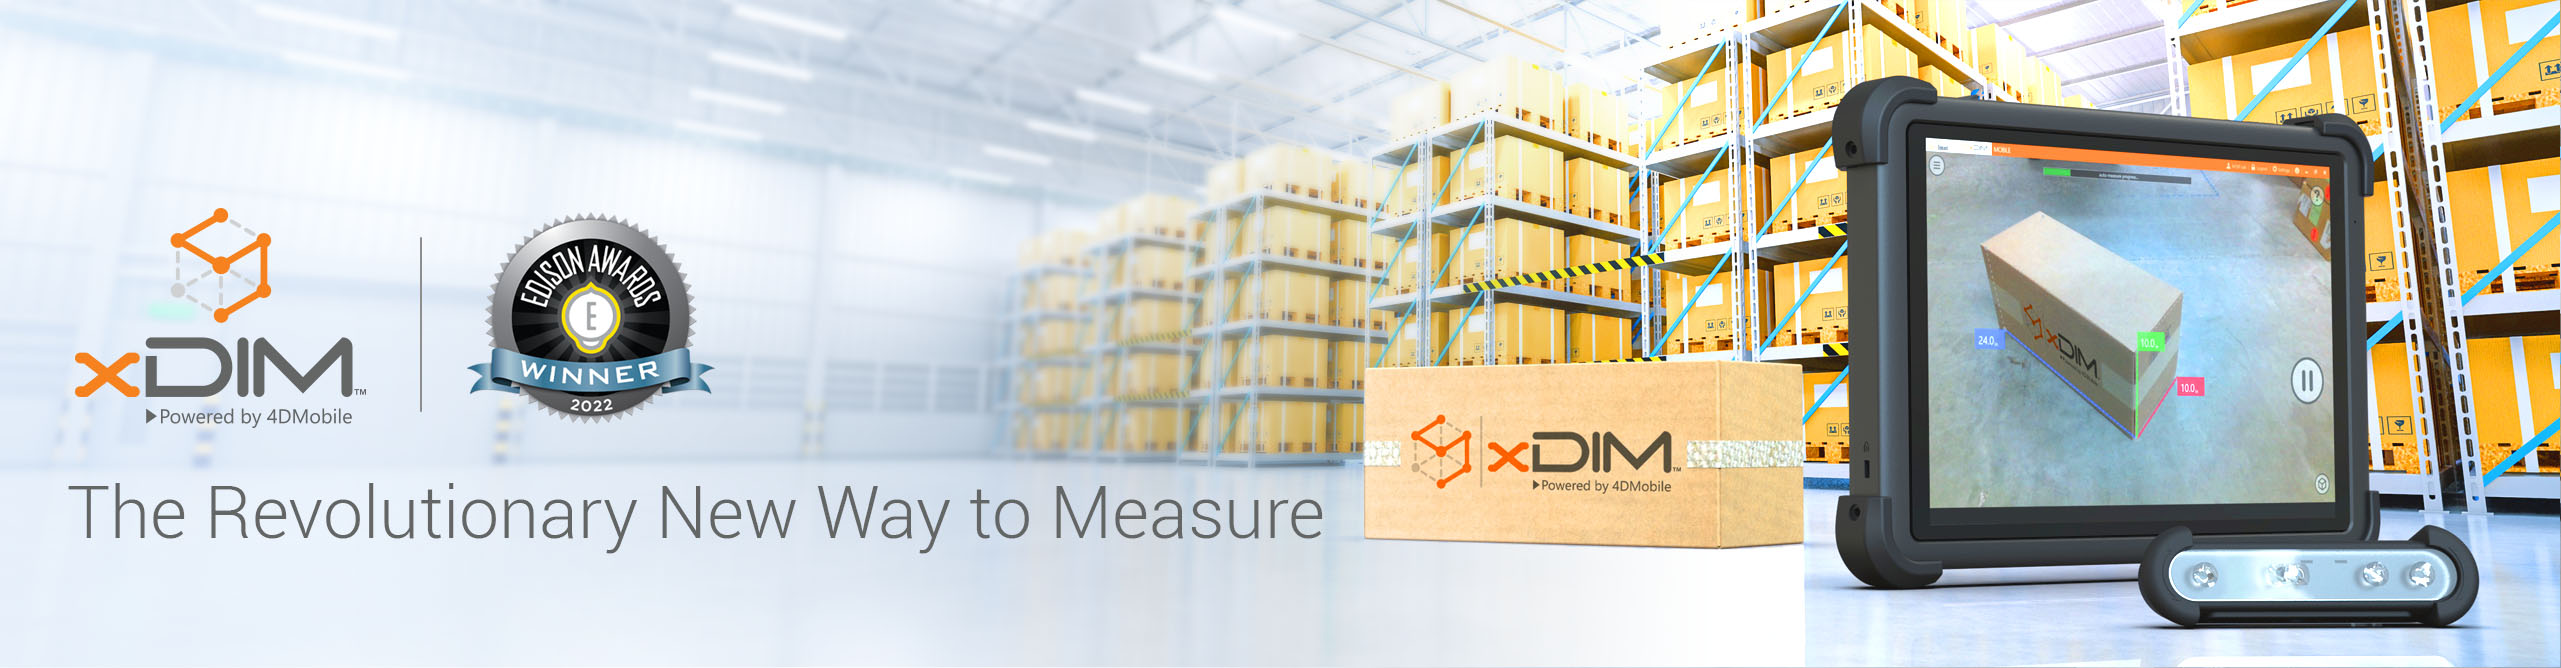 xDIM, Powered by 4D Mobile, the revolutionary new way to measure boxes and parcels